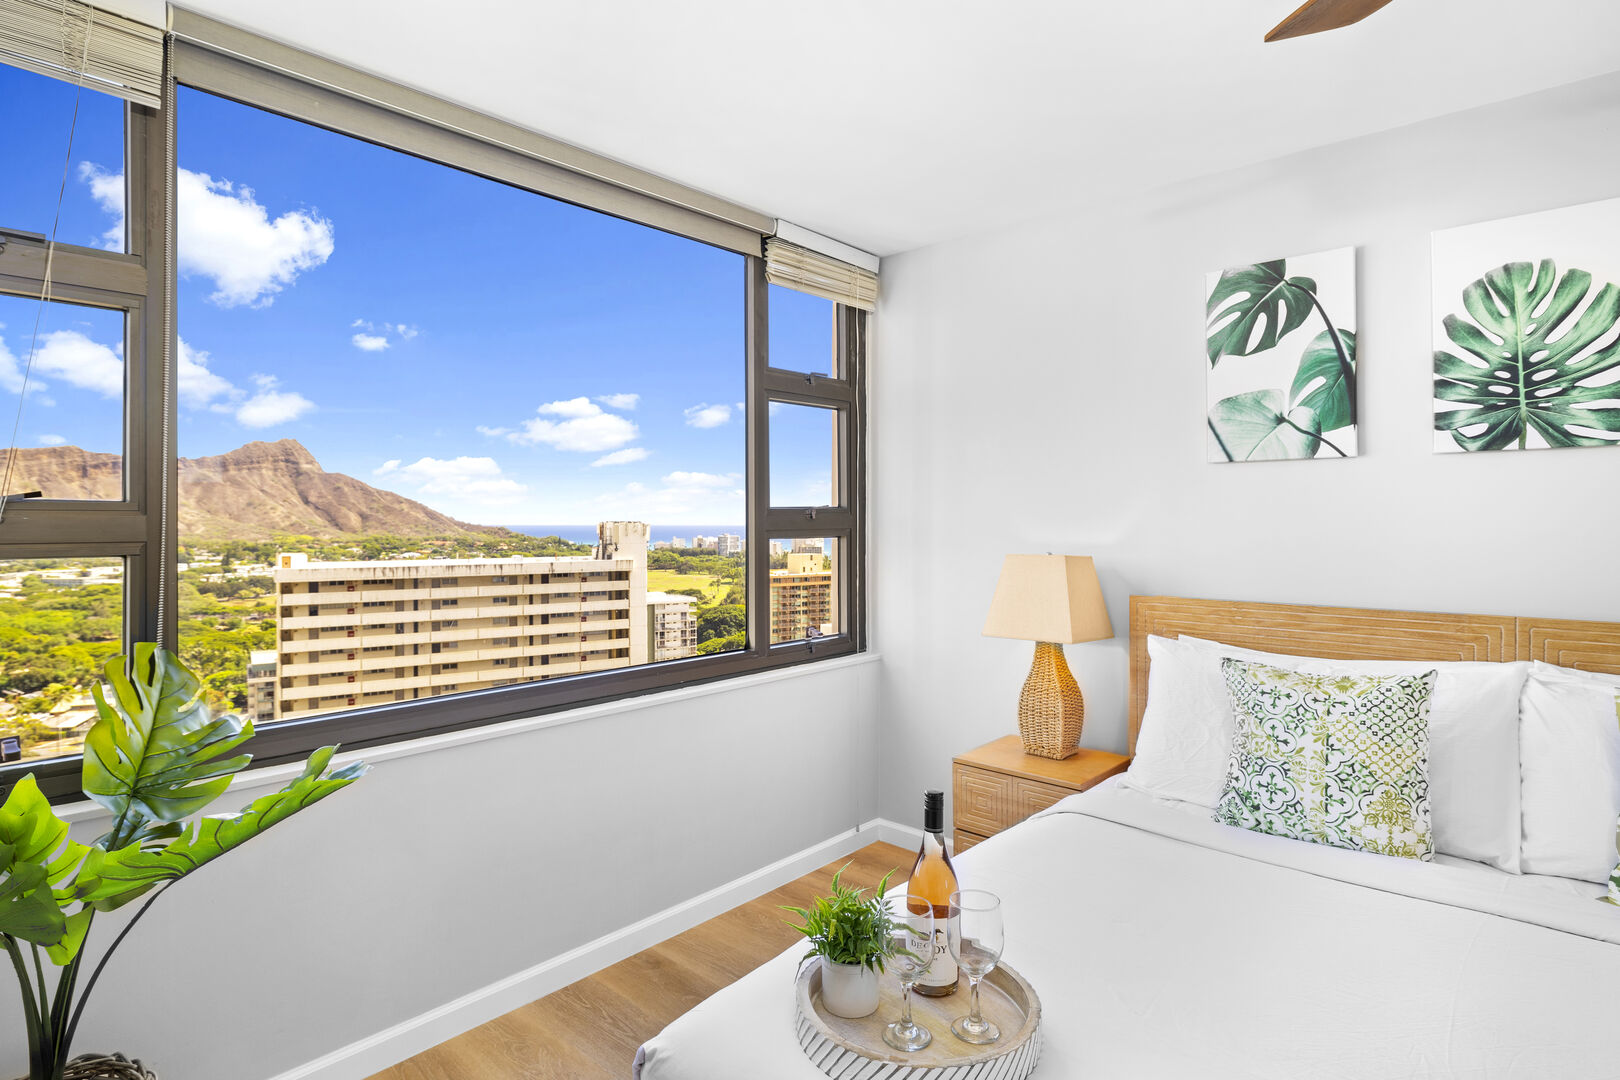 King-size bed with stunning Diamond head views!